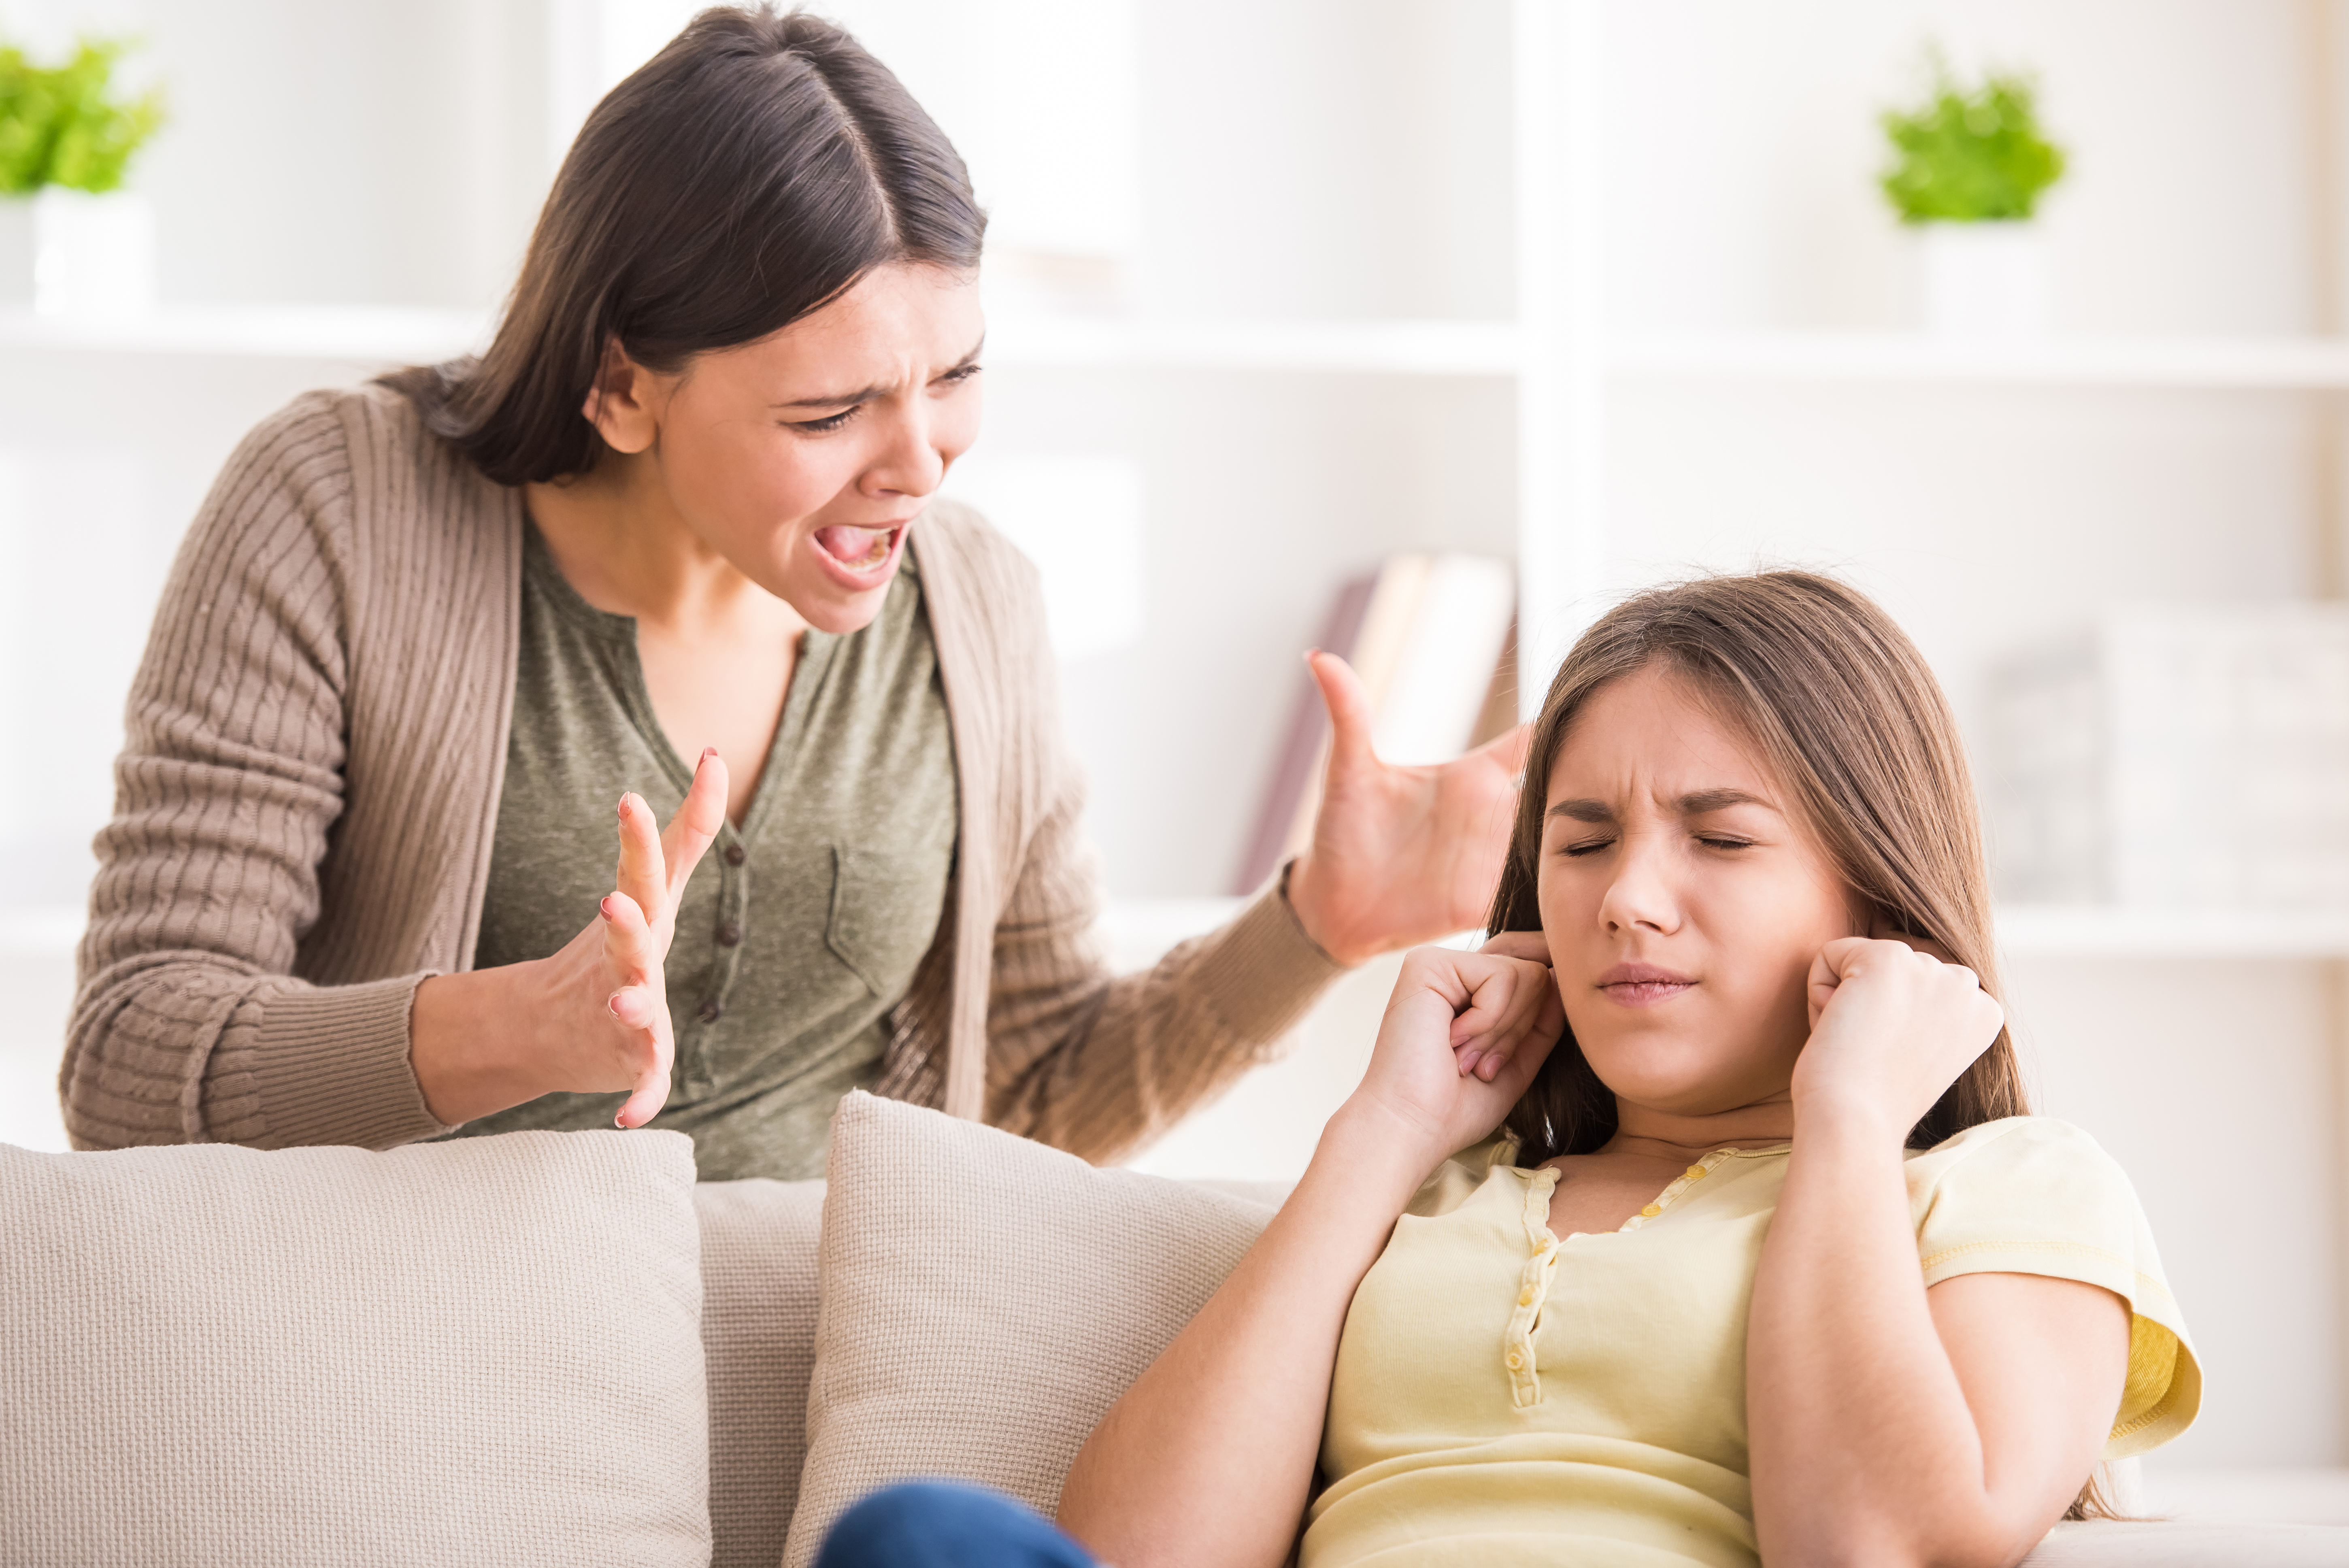 A mother and daughter arguing | Source: Shutterstock